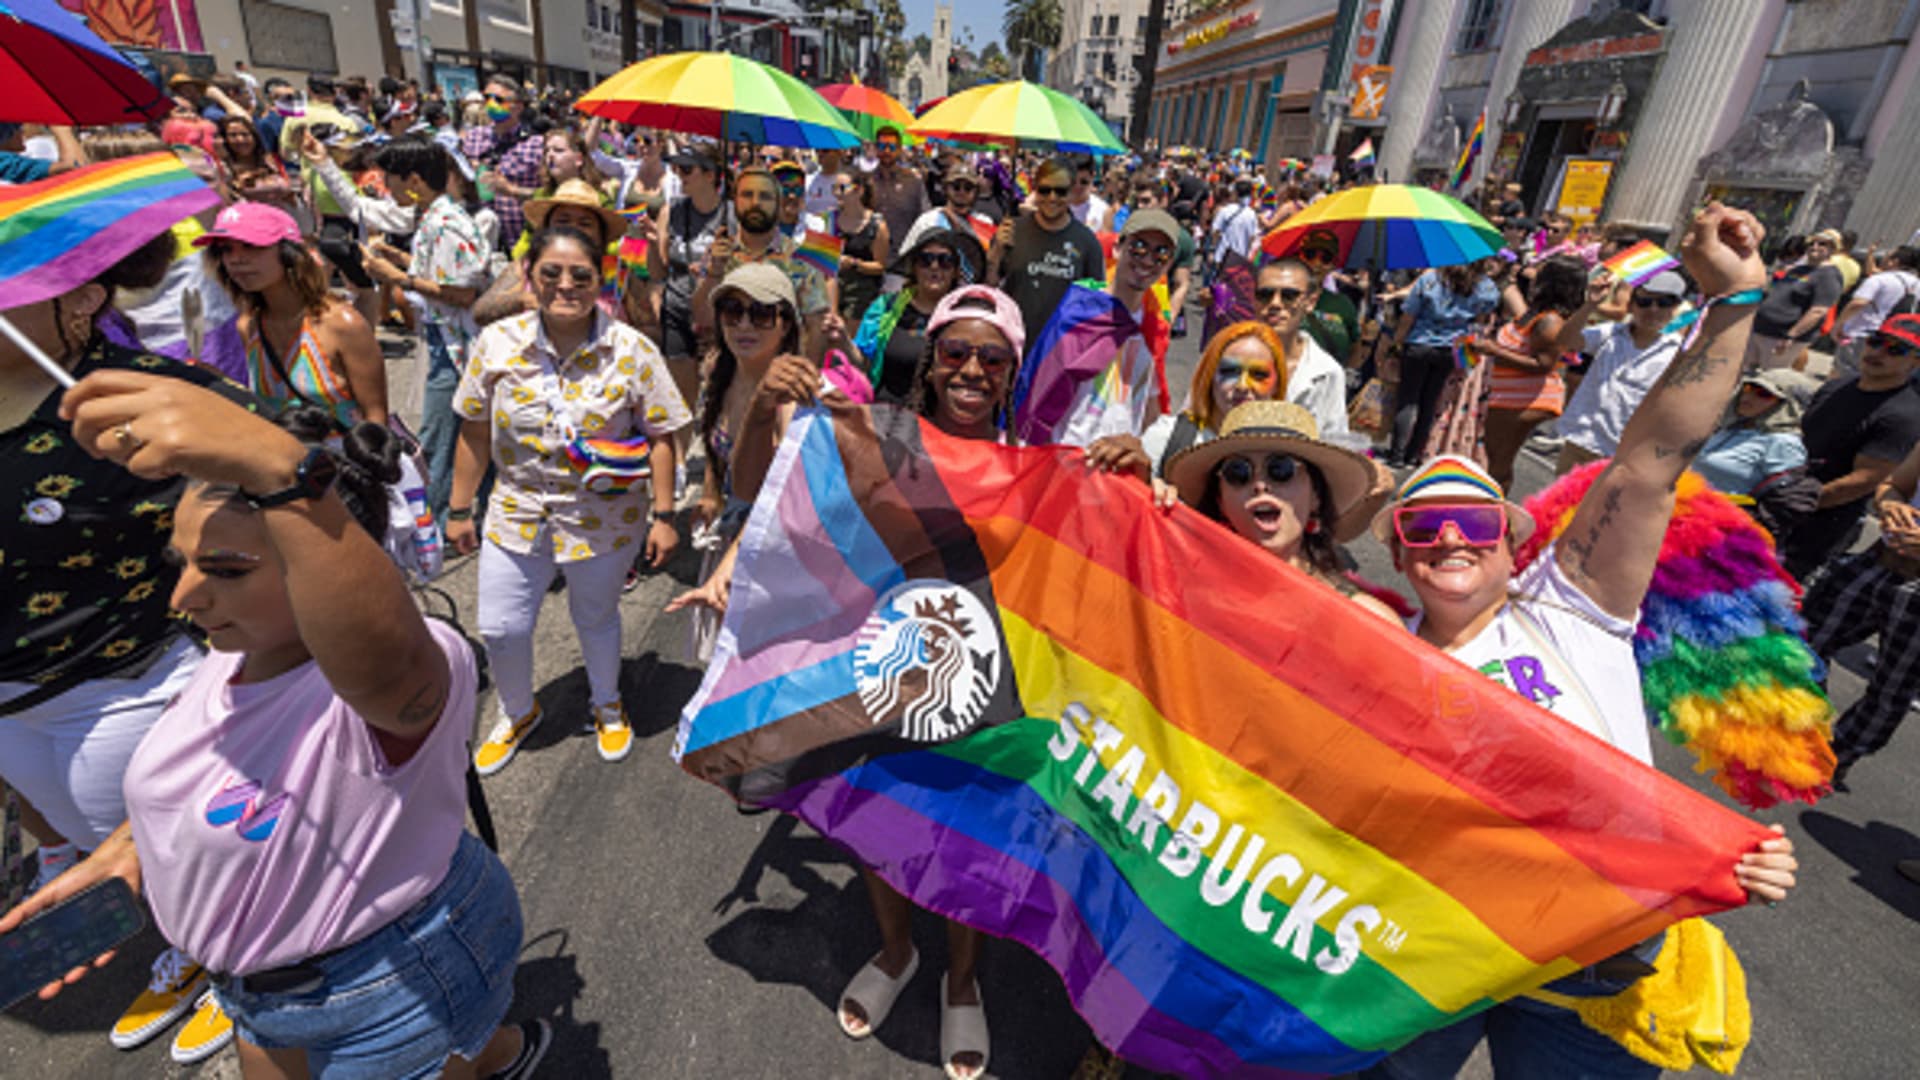 Starbucks union says workers will strike over Pride decor